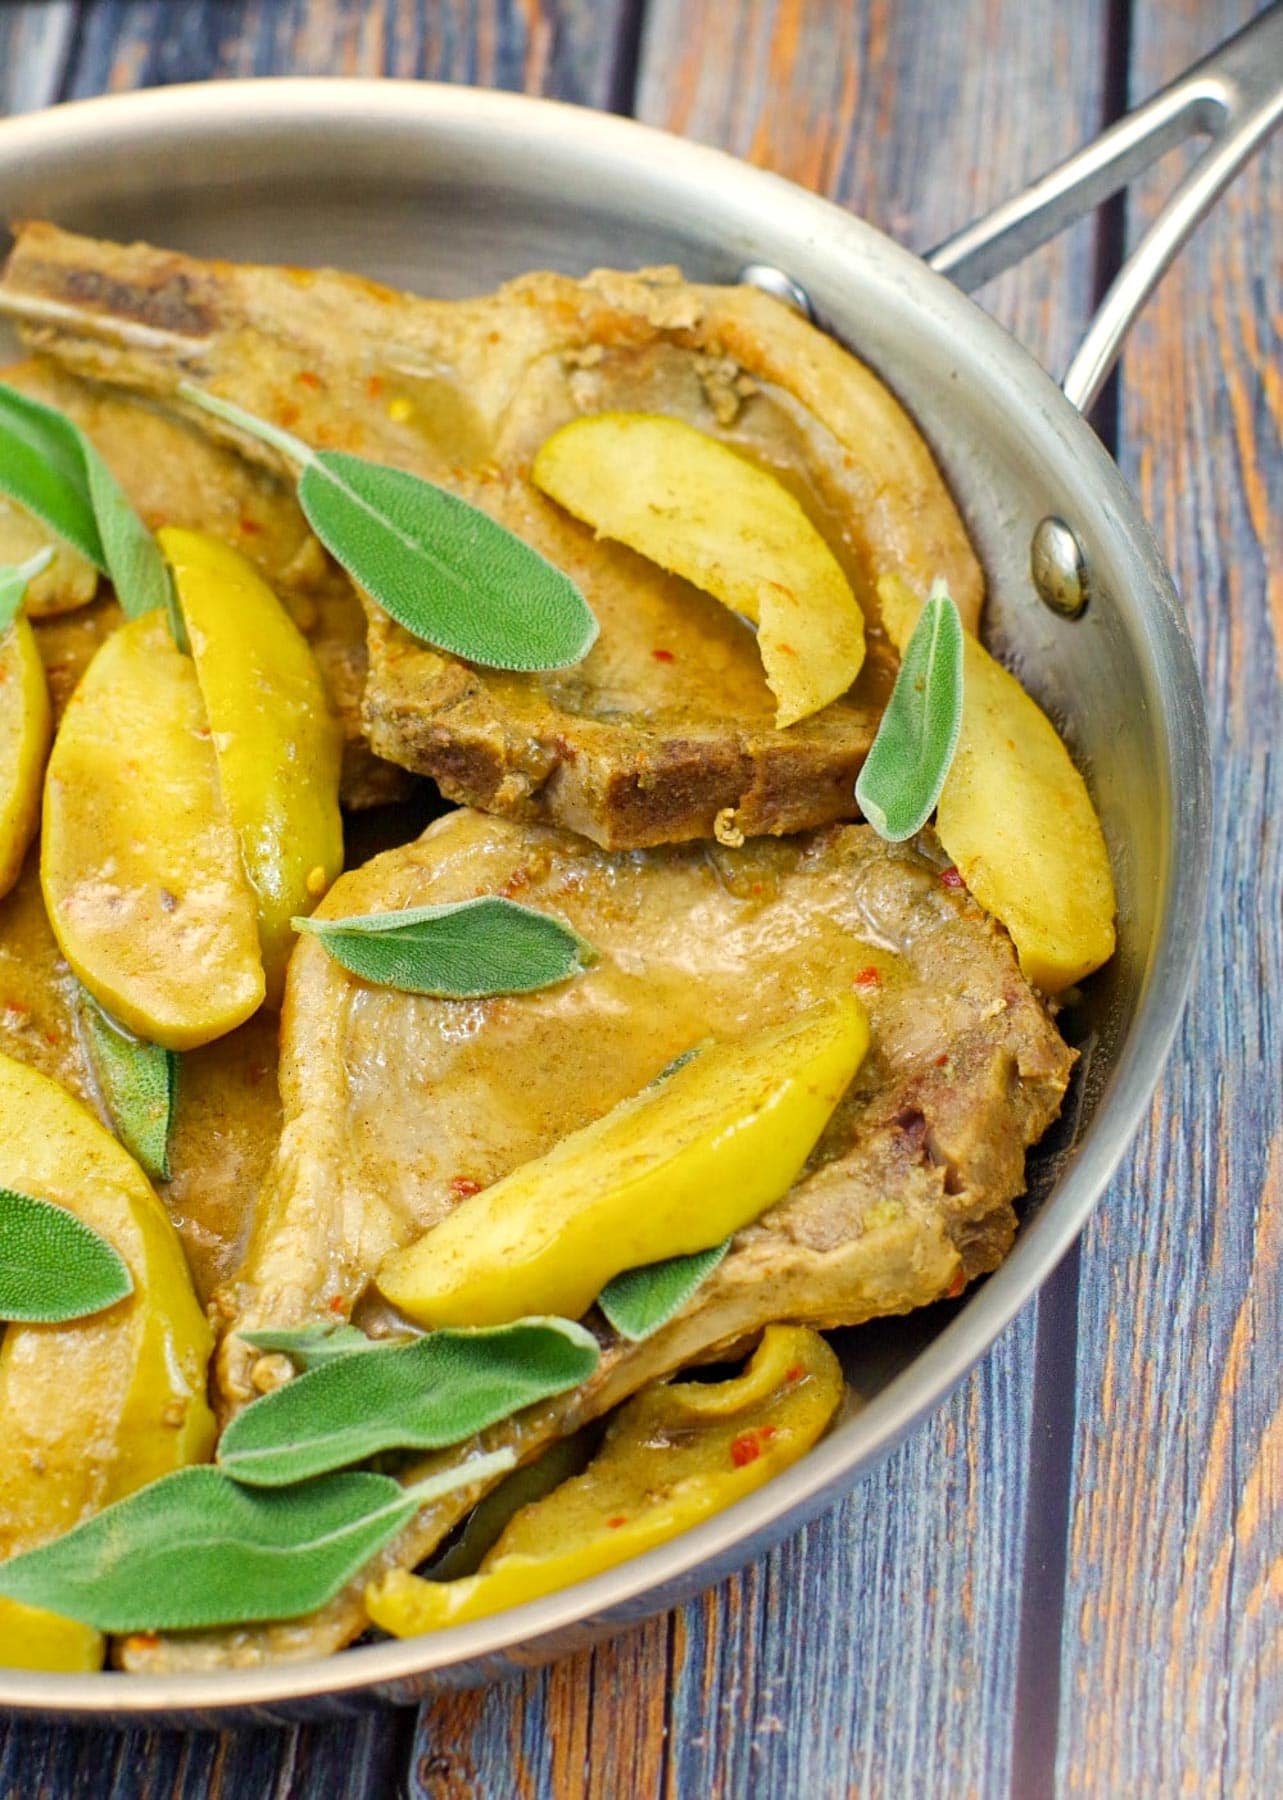 ½ pan of apple and pork chops with sage leaves